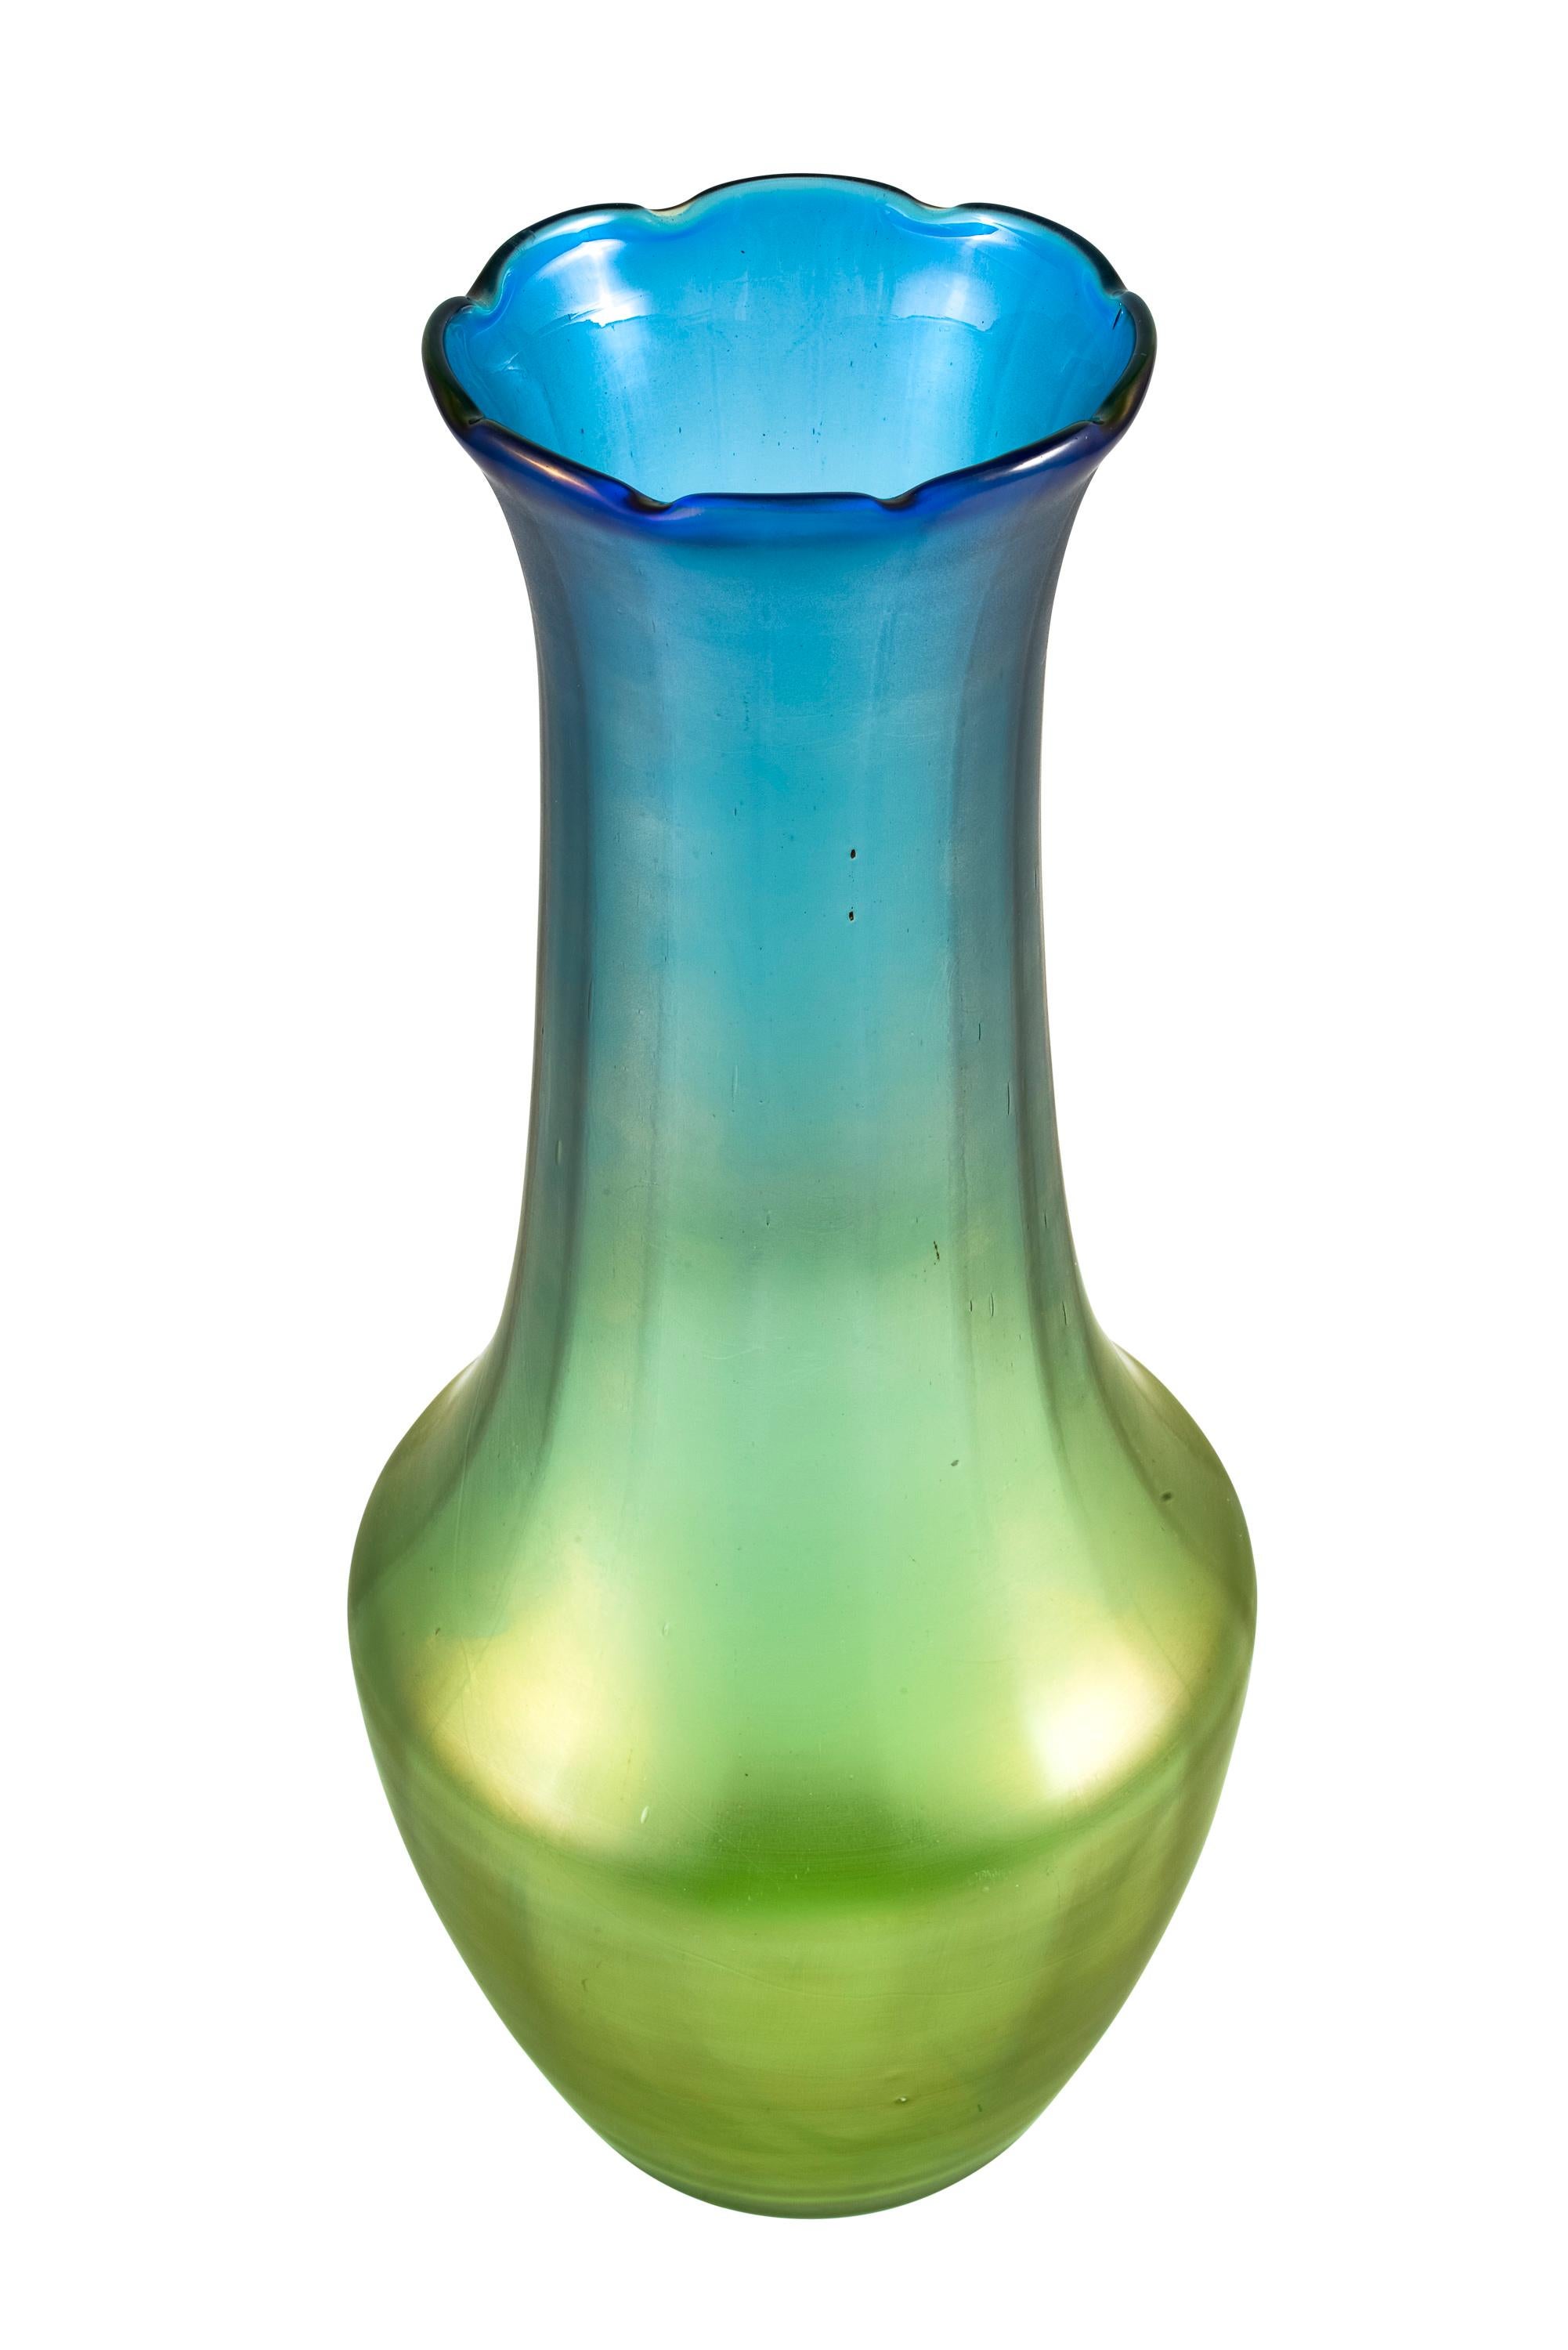 Monumental glass vase designed by Hubert Gessner for E. Balakowits Sohne manufactured by Johann Loetz Witwe 